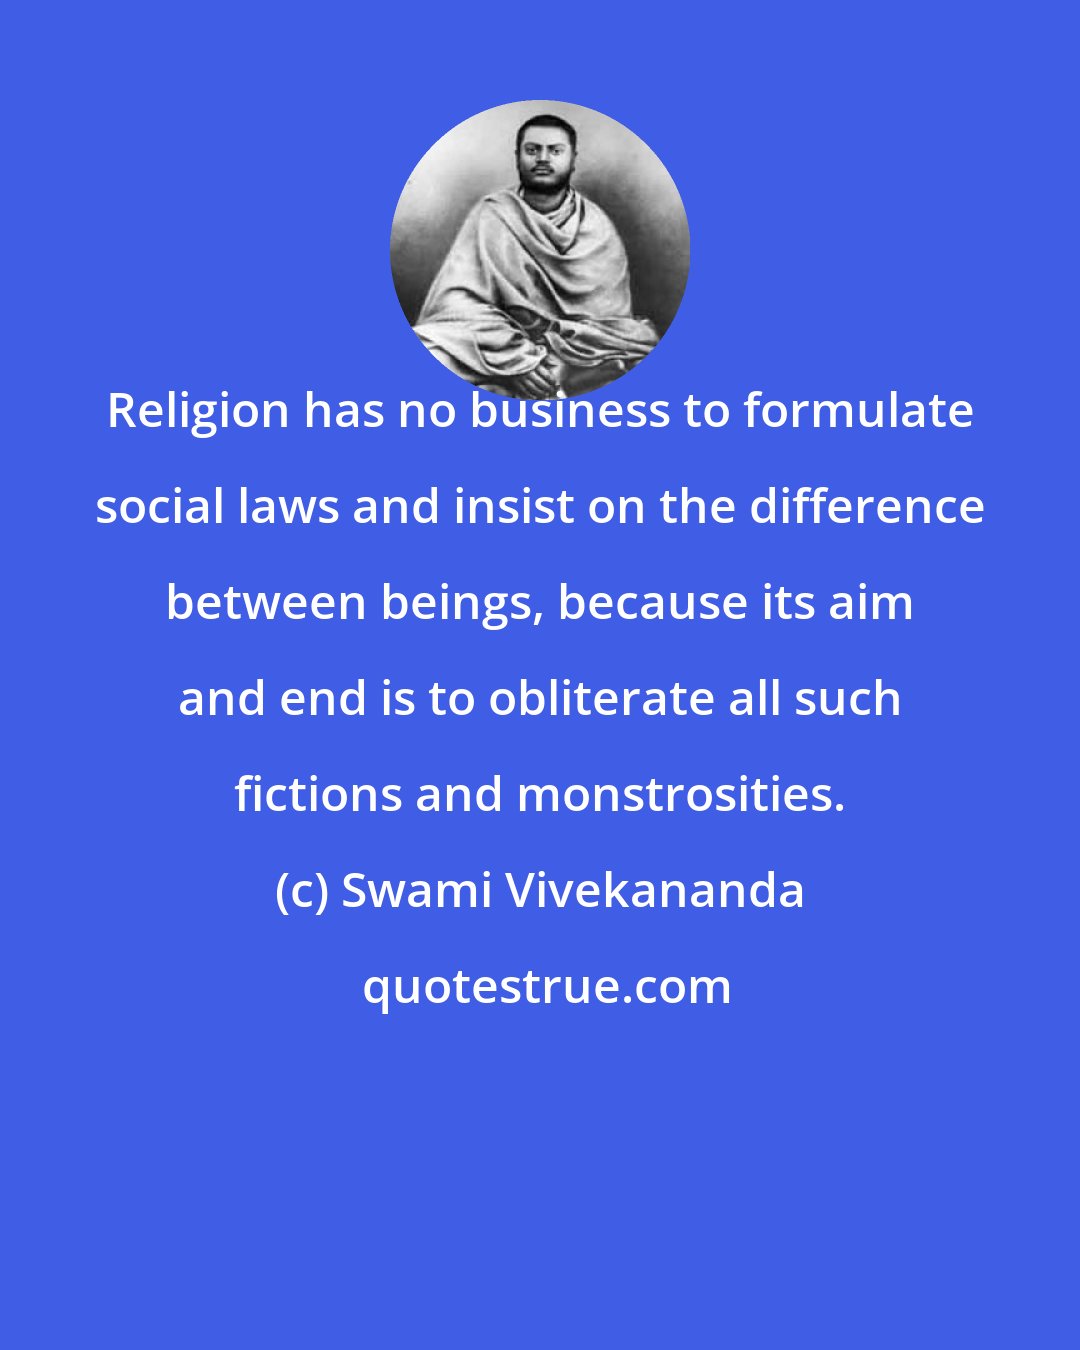 Swami Vivekananda: Religion has no business to formulate social laws and insist on the difference between beings, because its aim and end is to obliterate all such fictions and monstrosities.